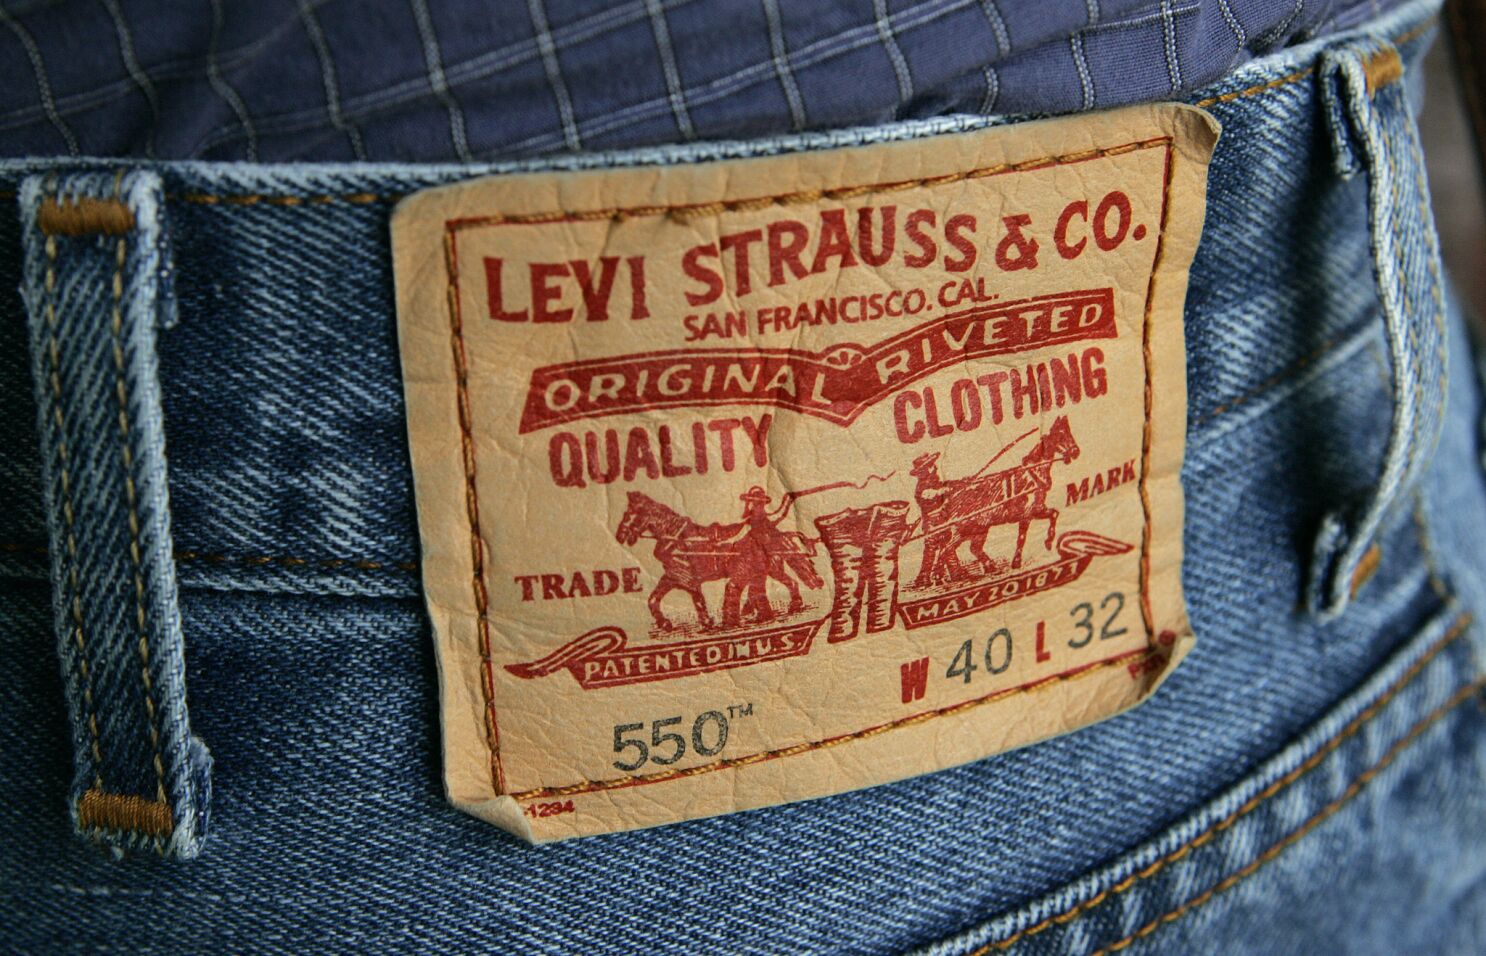 Levi's CEO hasn't washed jeans in a year, admits it sounds disgusting - Los  Angeles Times